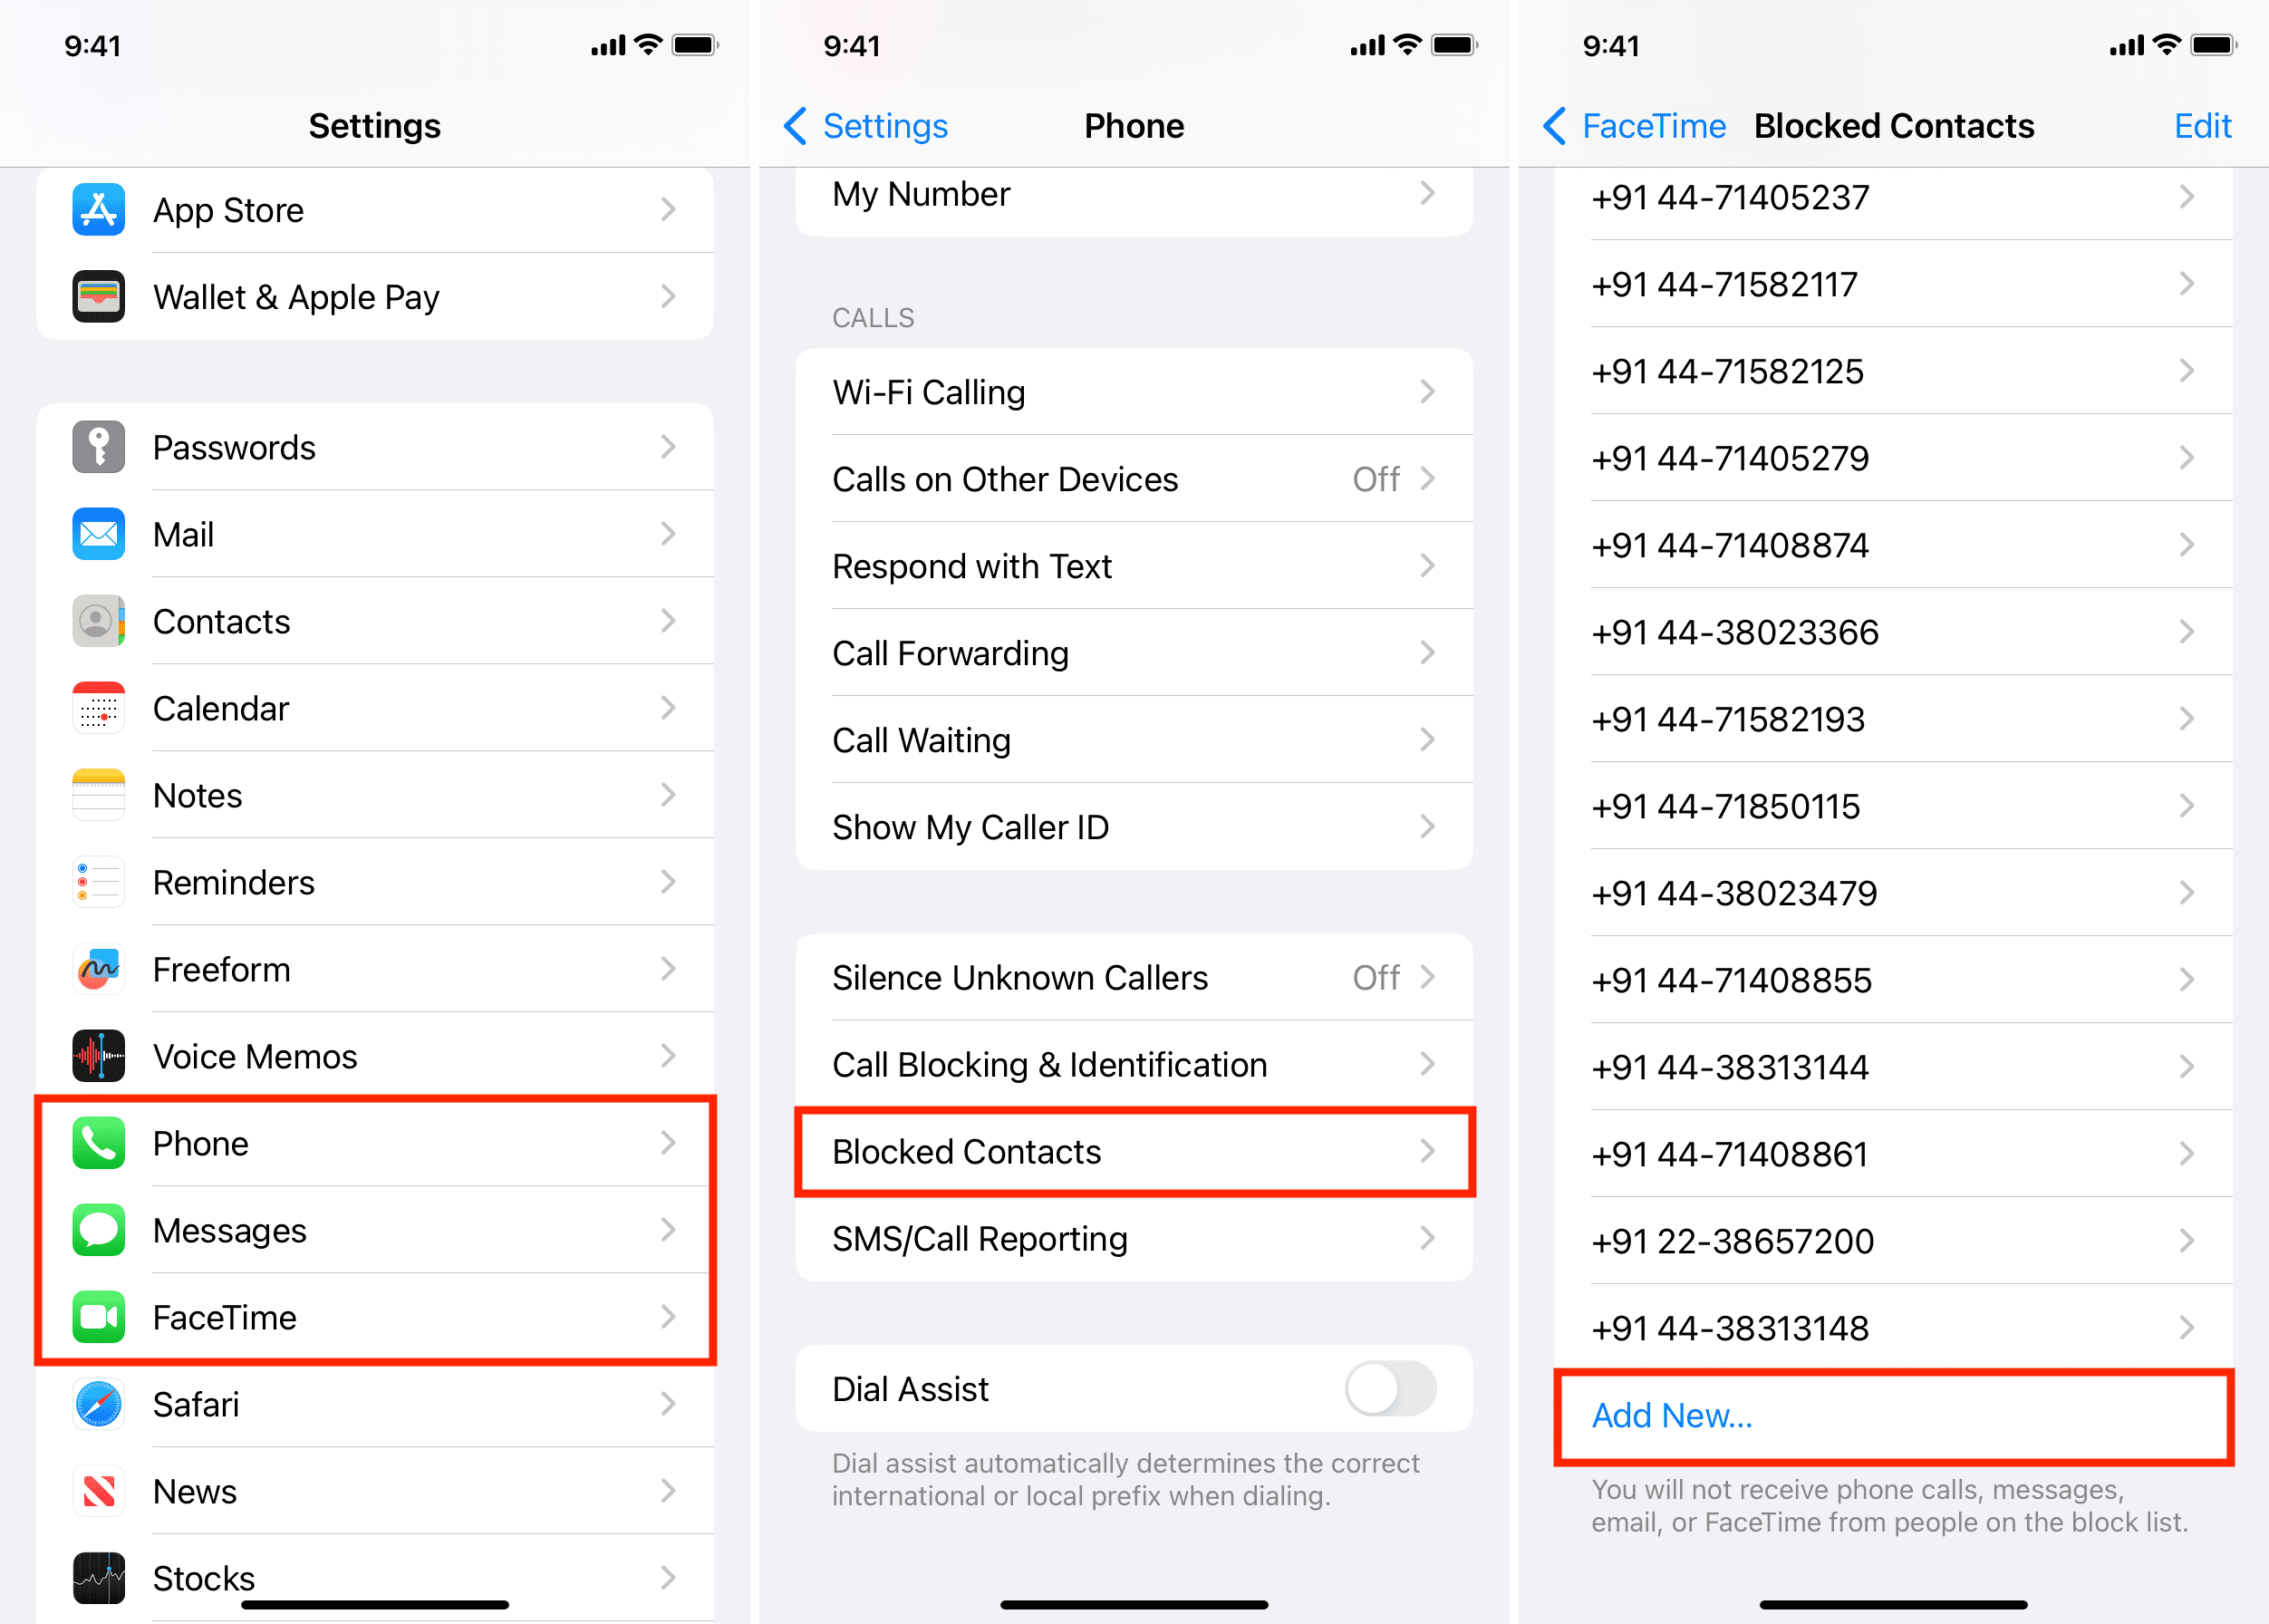 Add new entry to blocked list in iPhone Settings